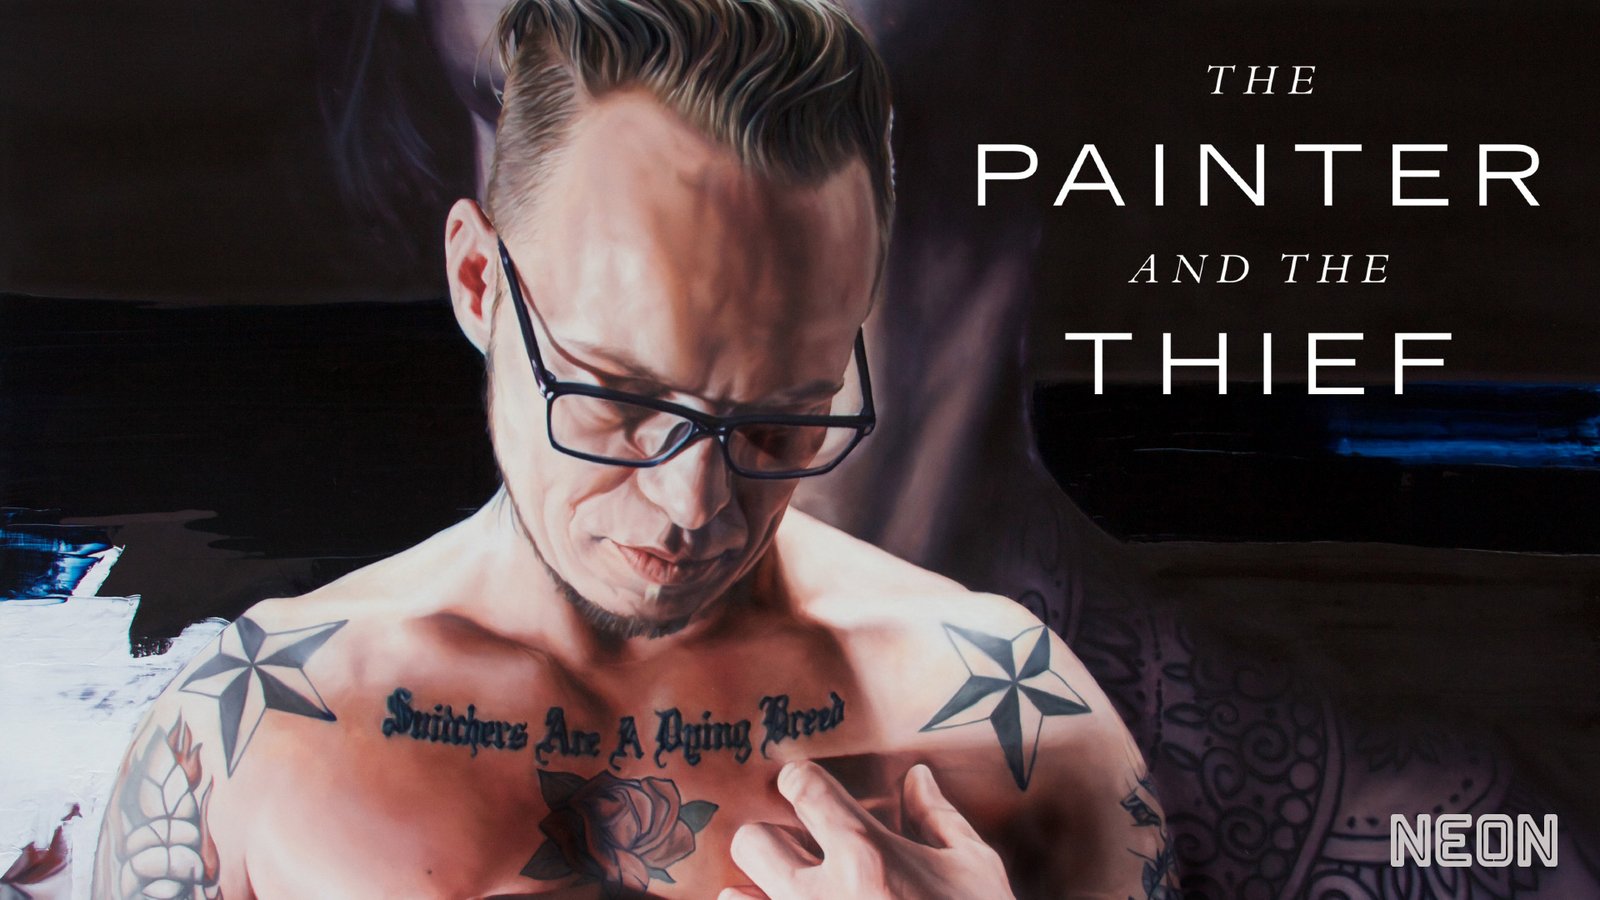 The Painter and the Thief